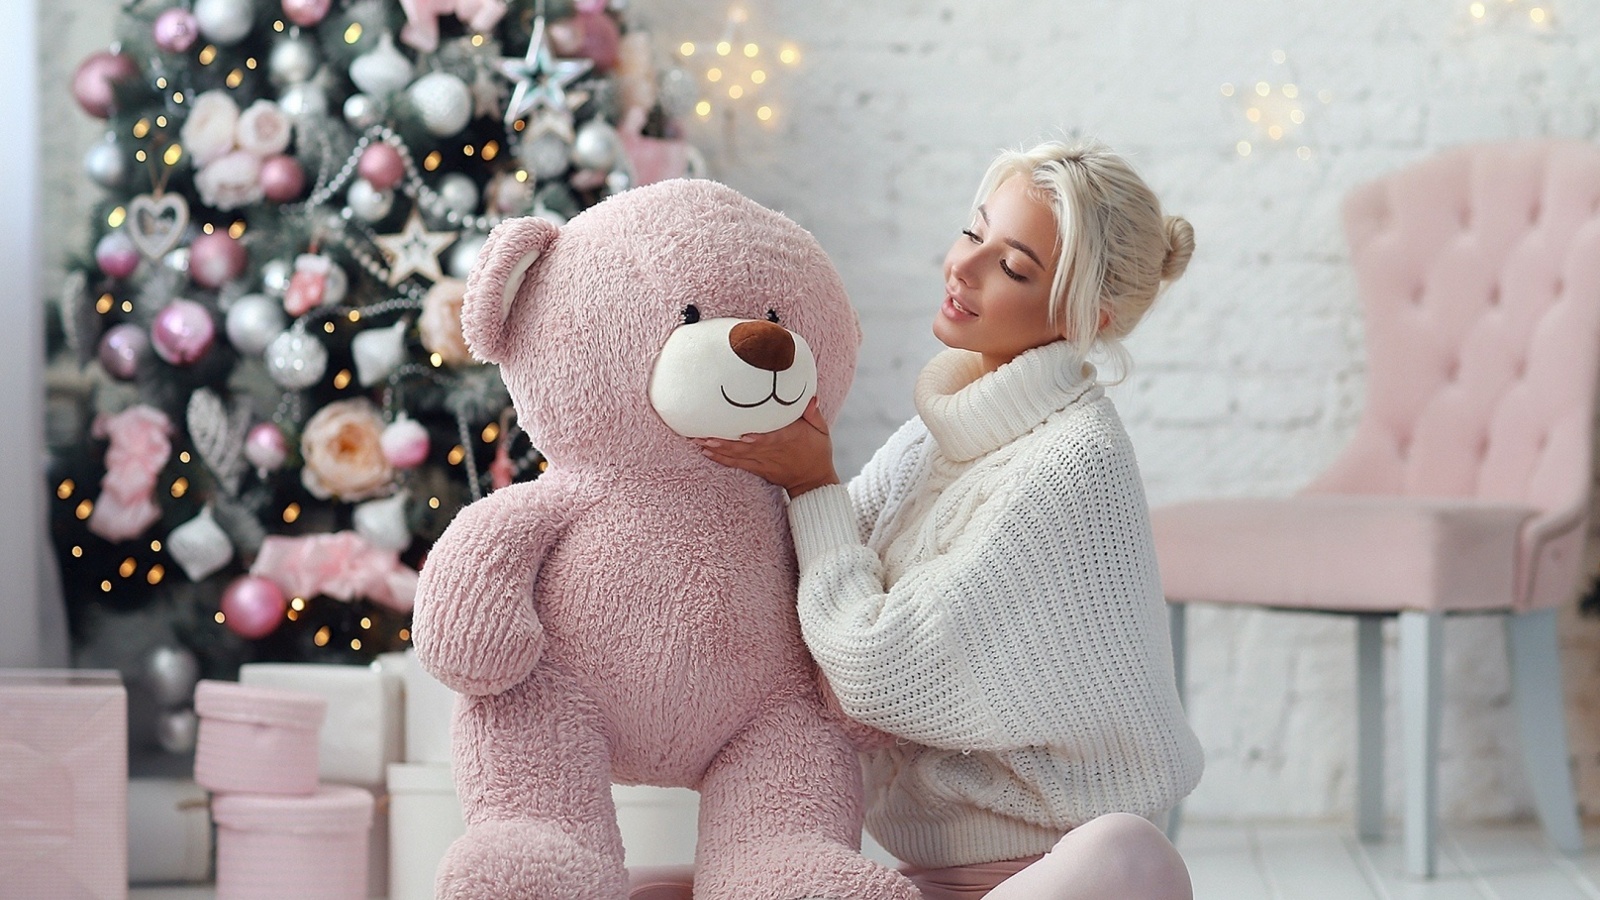 Das Christmas photo session with bear Wallpaper 1600x900